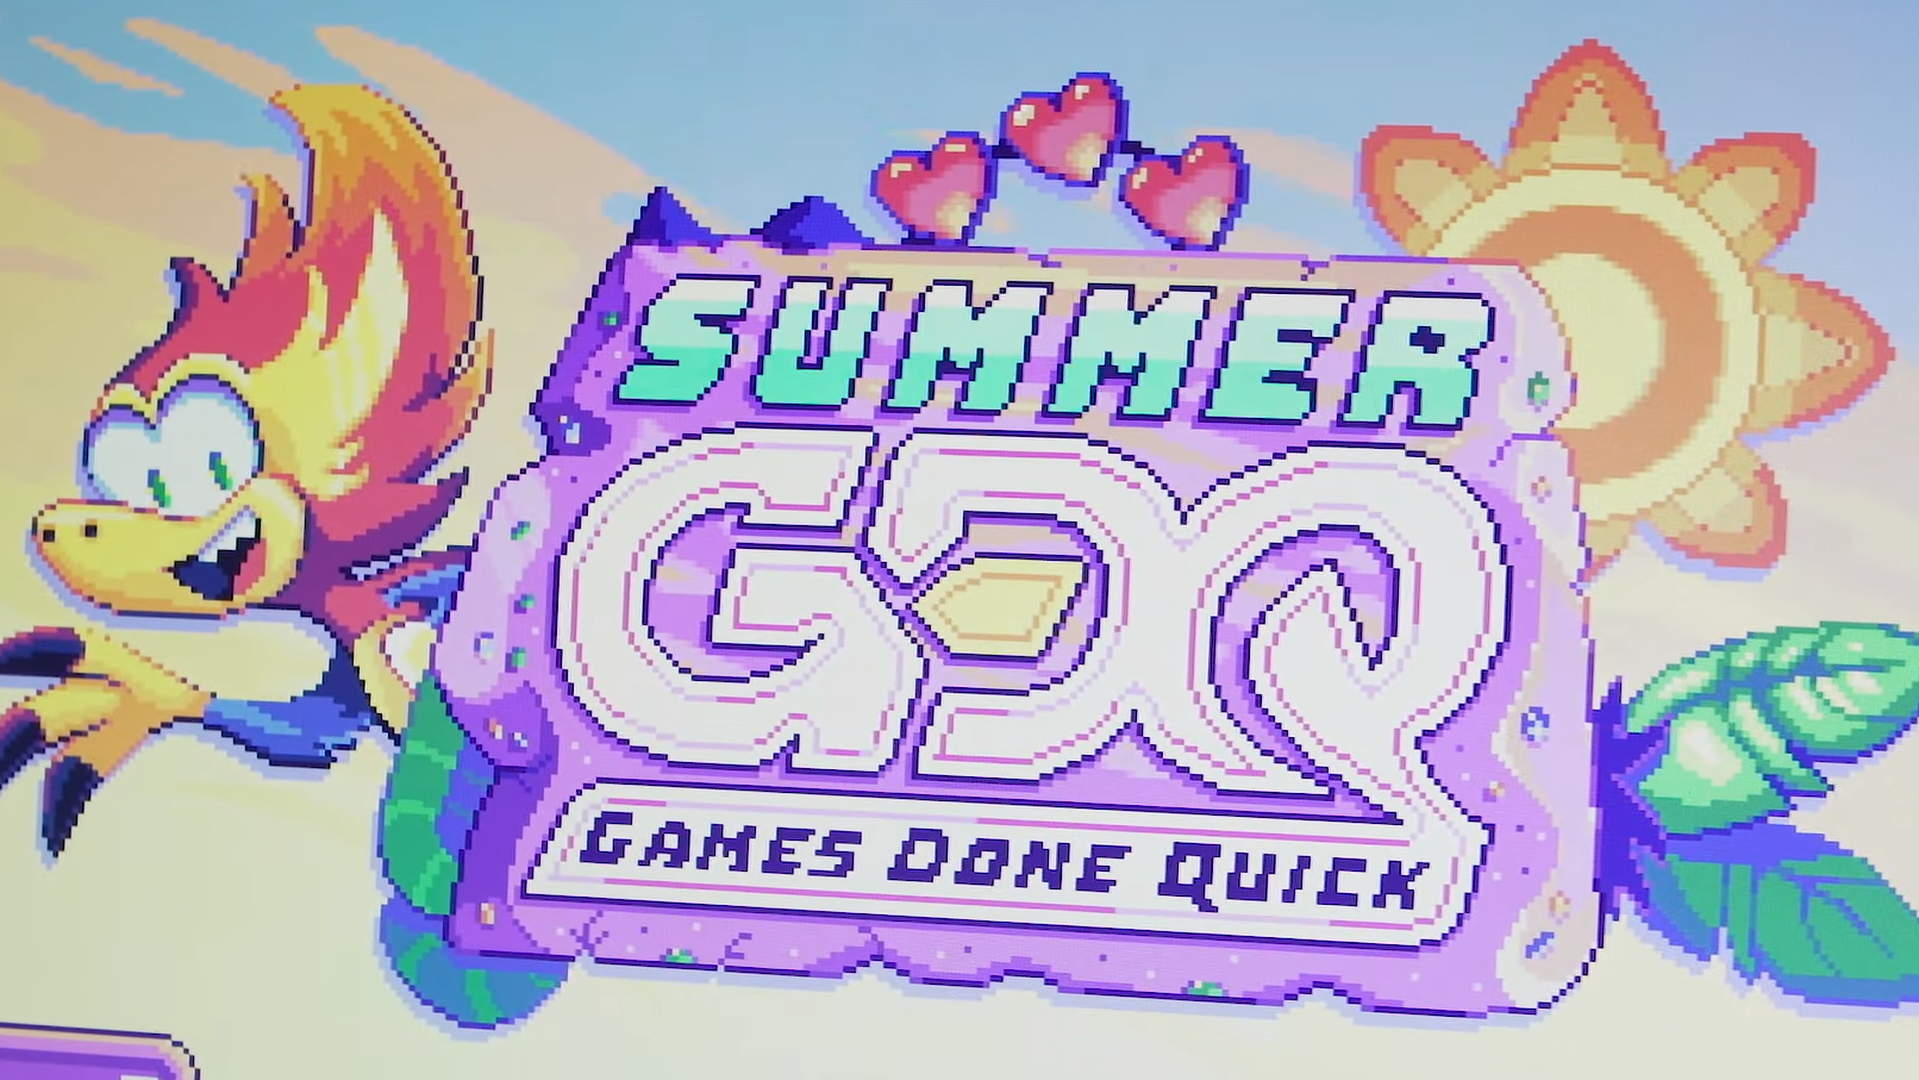 Over 3 million. Summer games done quick. Summer will игра. Саммер гейм фаст.